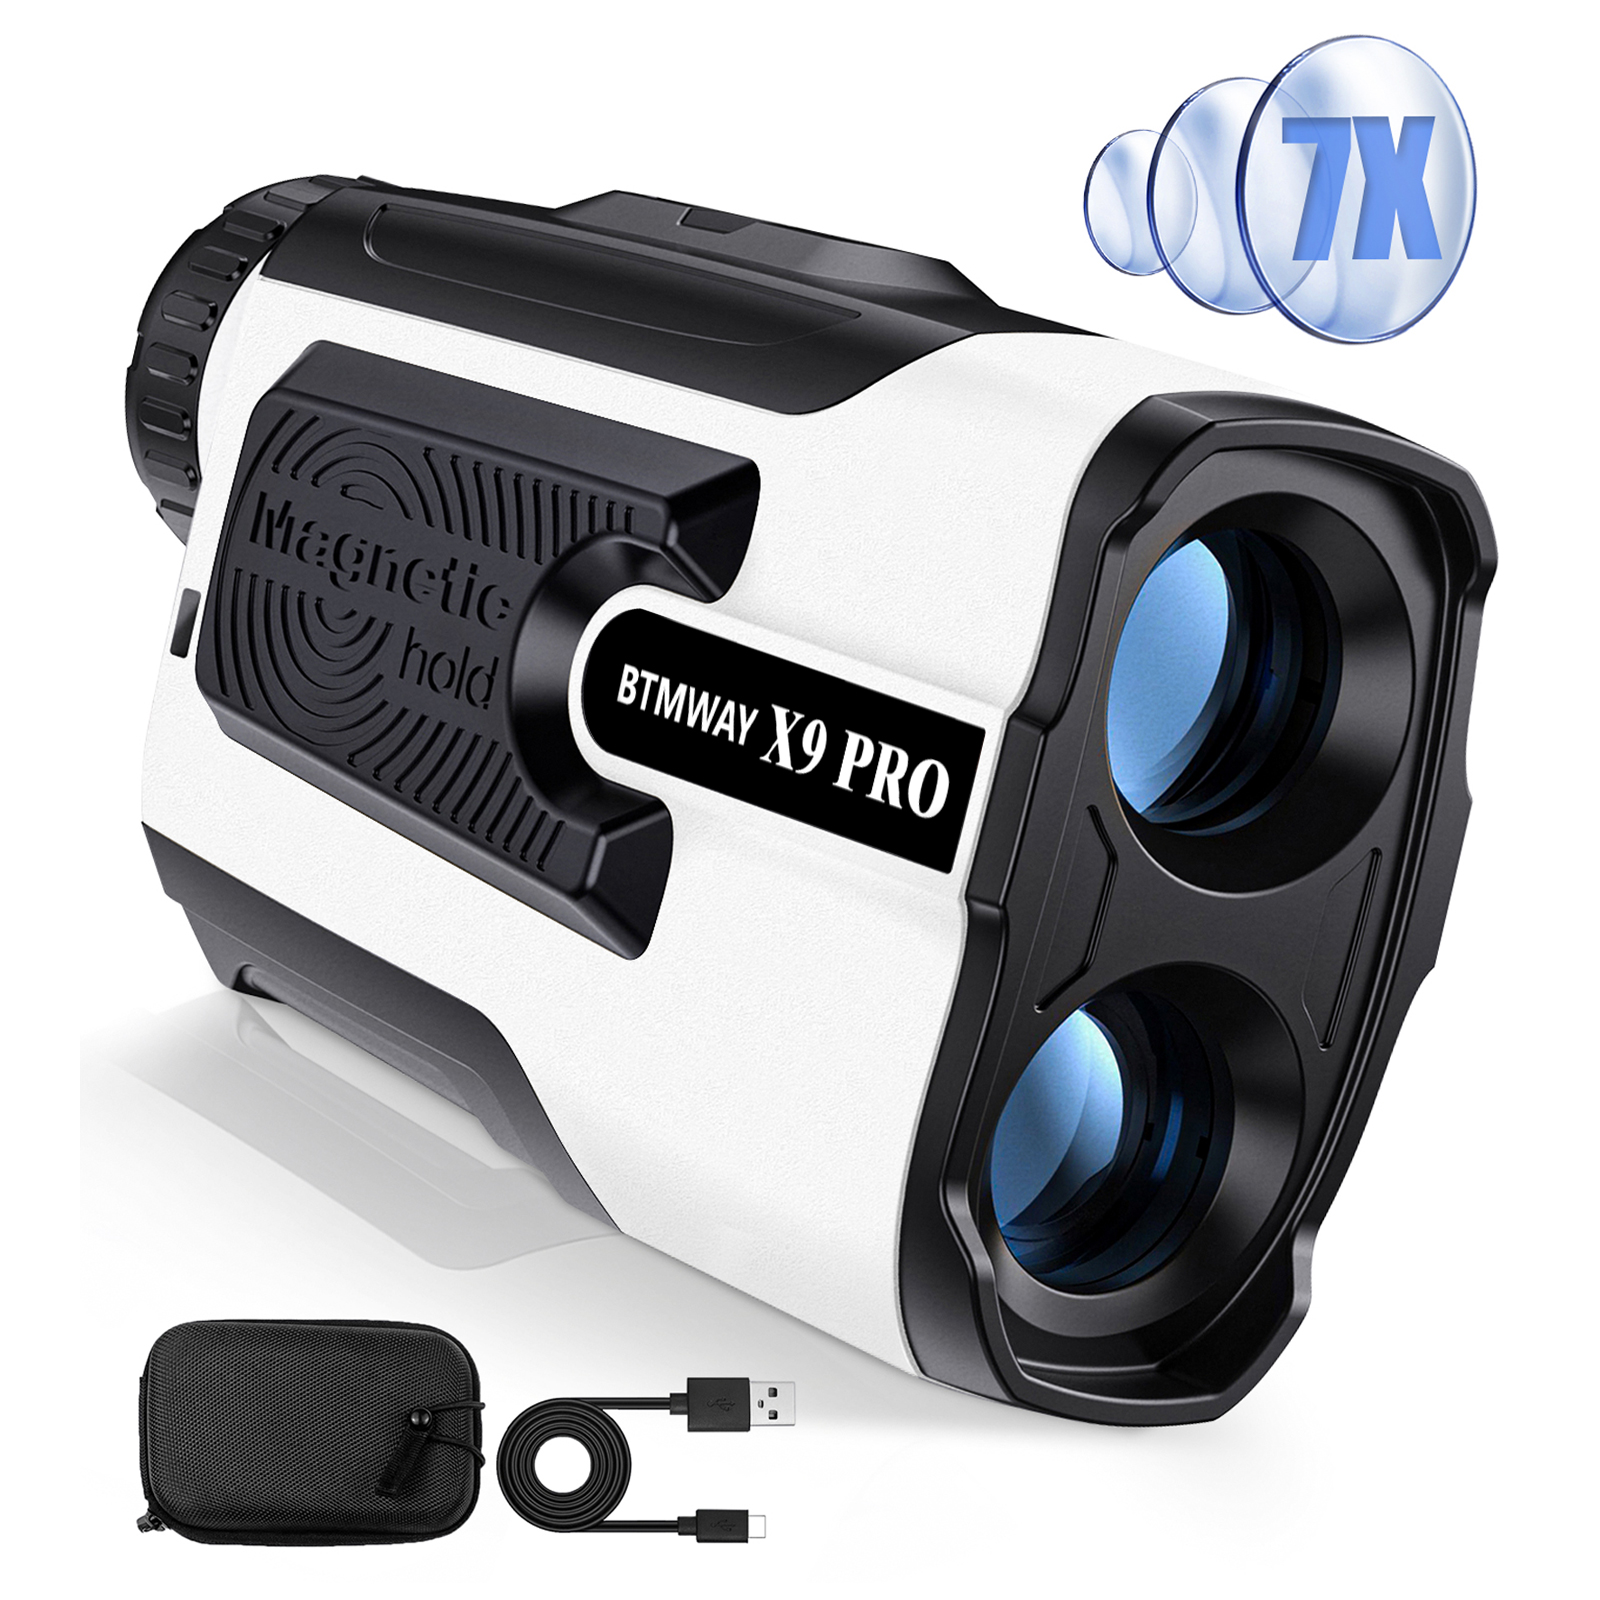 BTMWAY Laser Golf Rangefinder 900 Yards | 7X Magnification with Slope Switch, X9 PRO - image 1 of 12